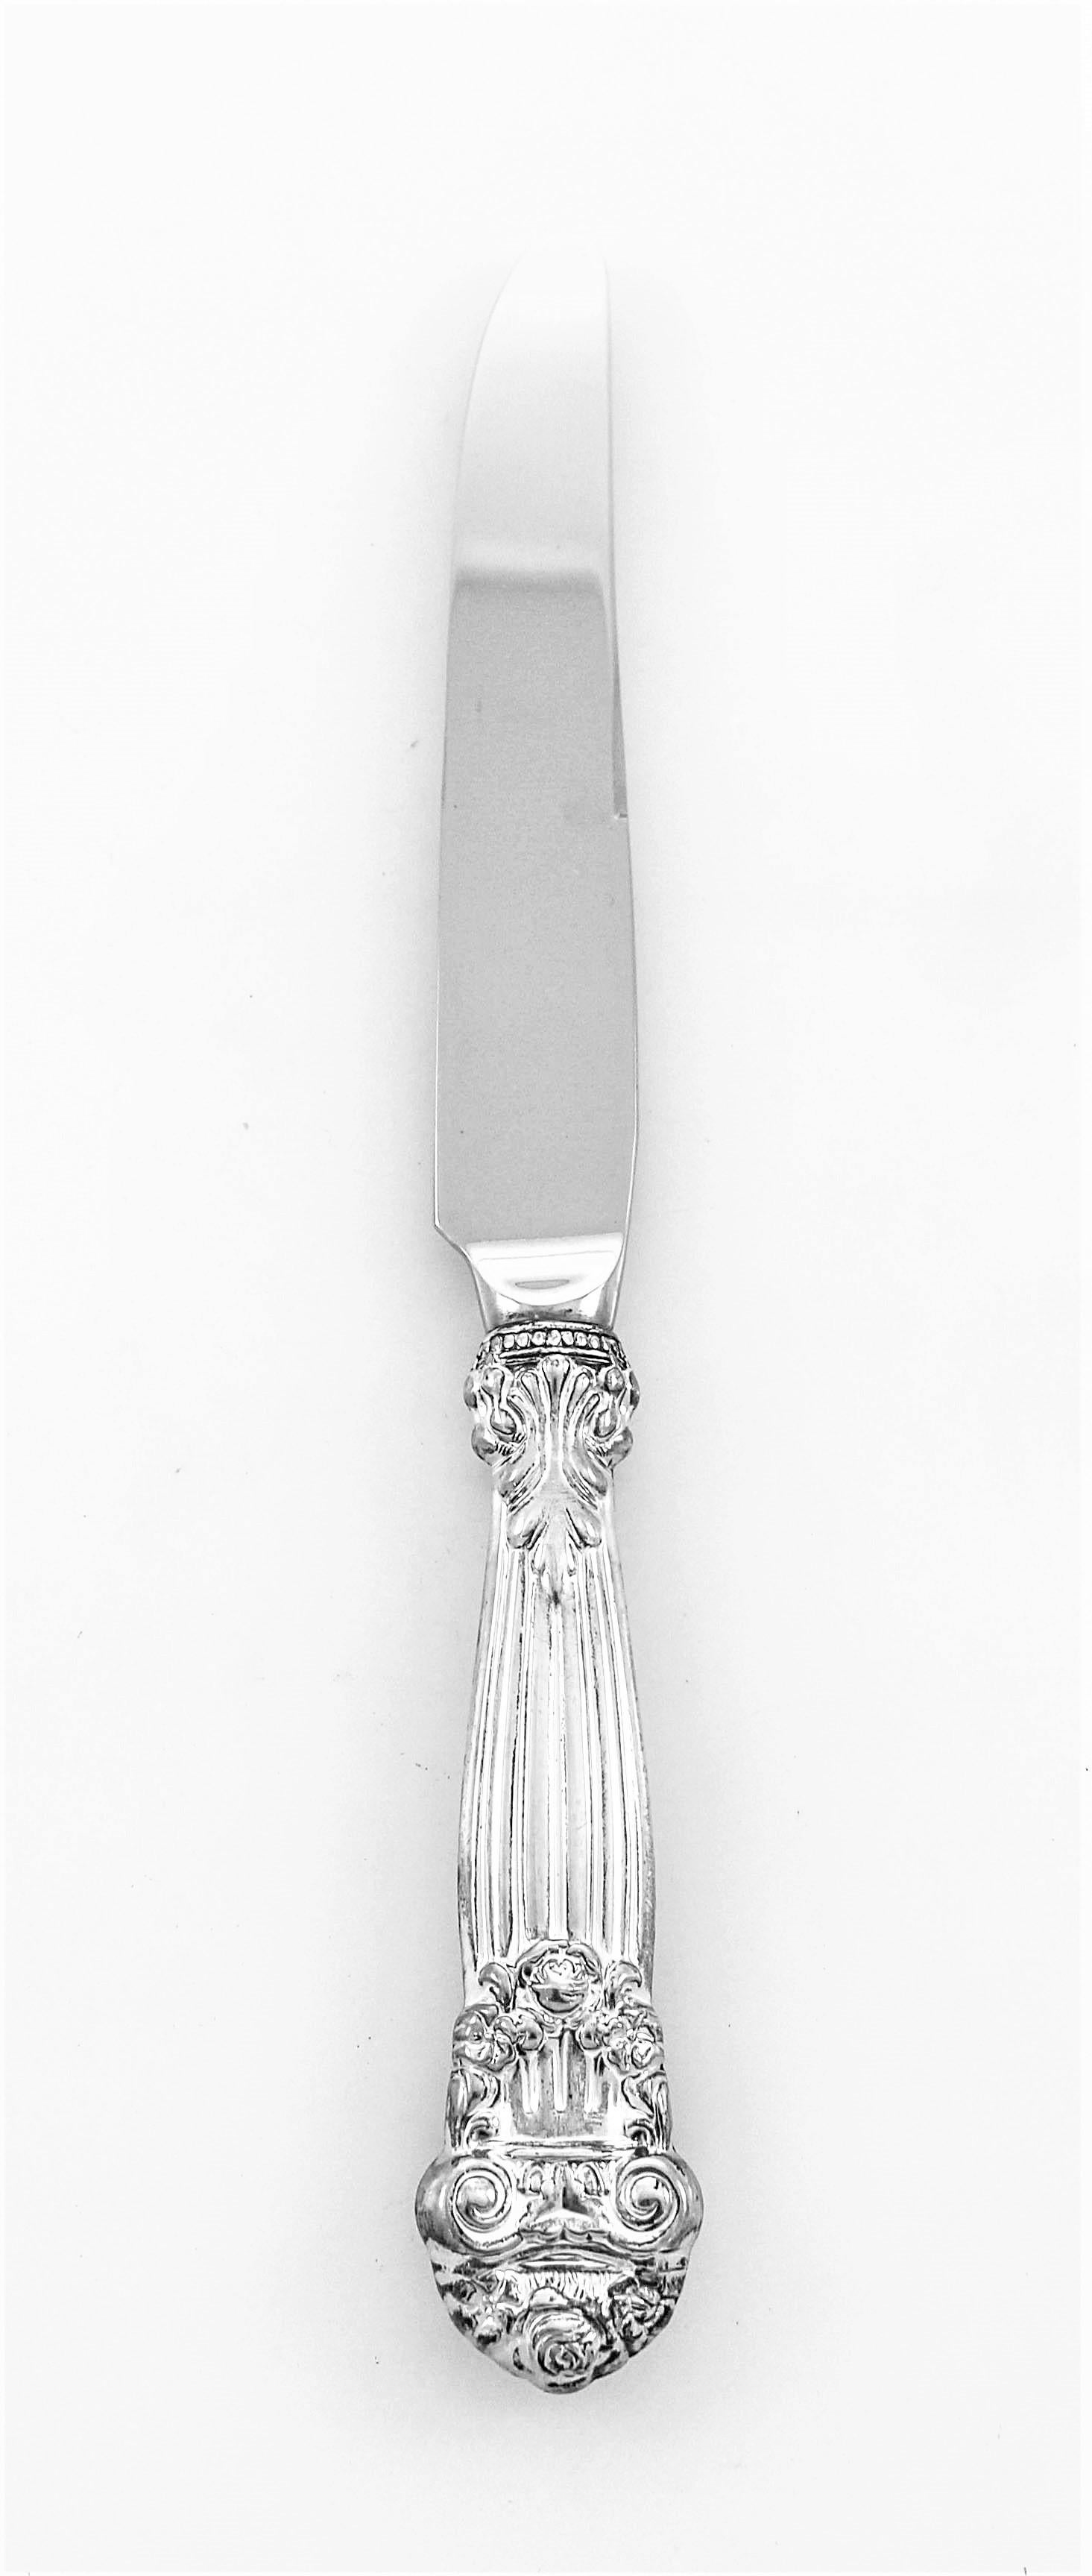 Georgian sterling silver flatware is one of those Classic patterns that never goes out of style. The floral bouquets on the tip of the handles and the intricate details in each piece — see salad fork tines. Start creating family and holiday memories